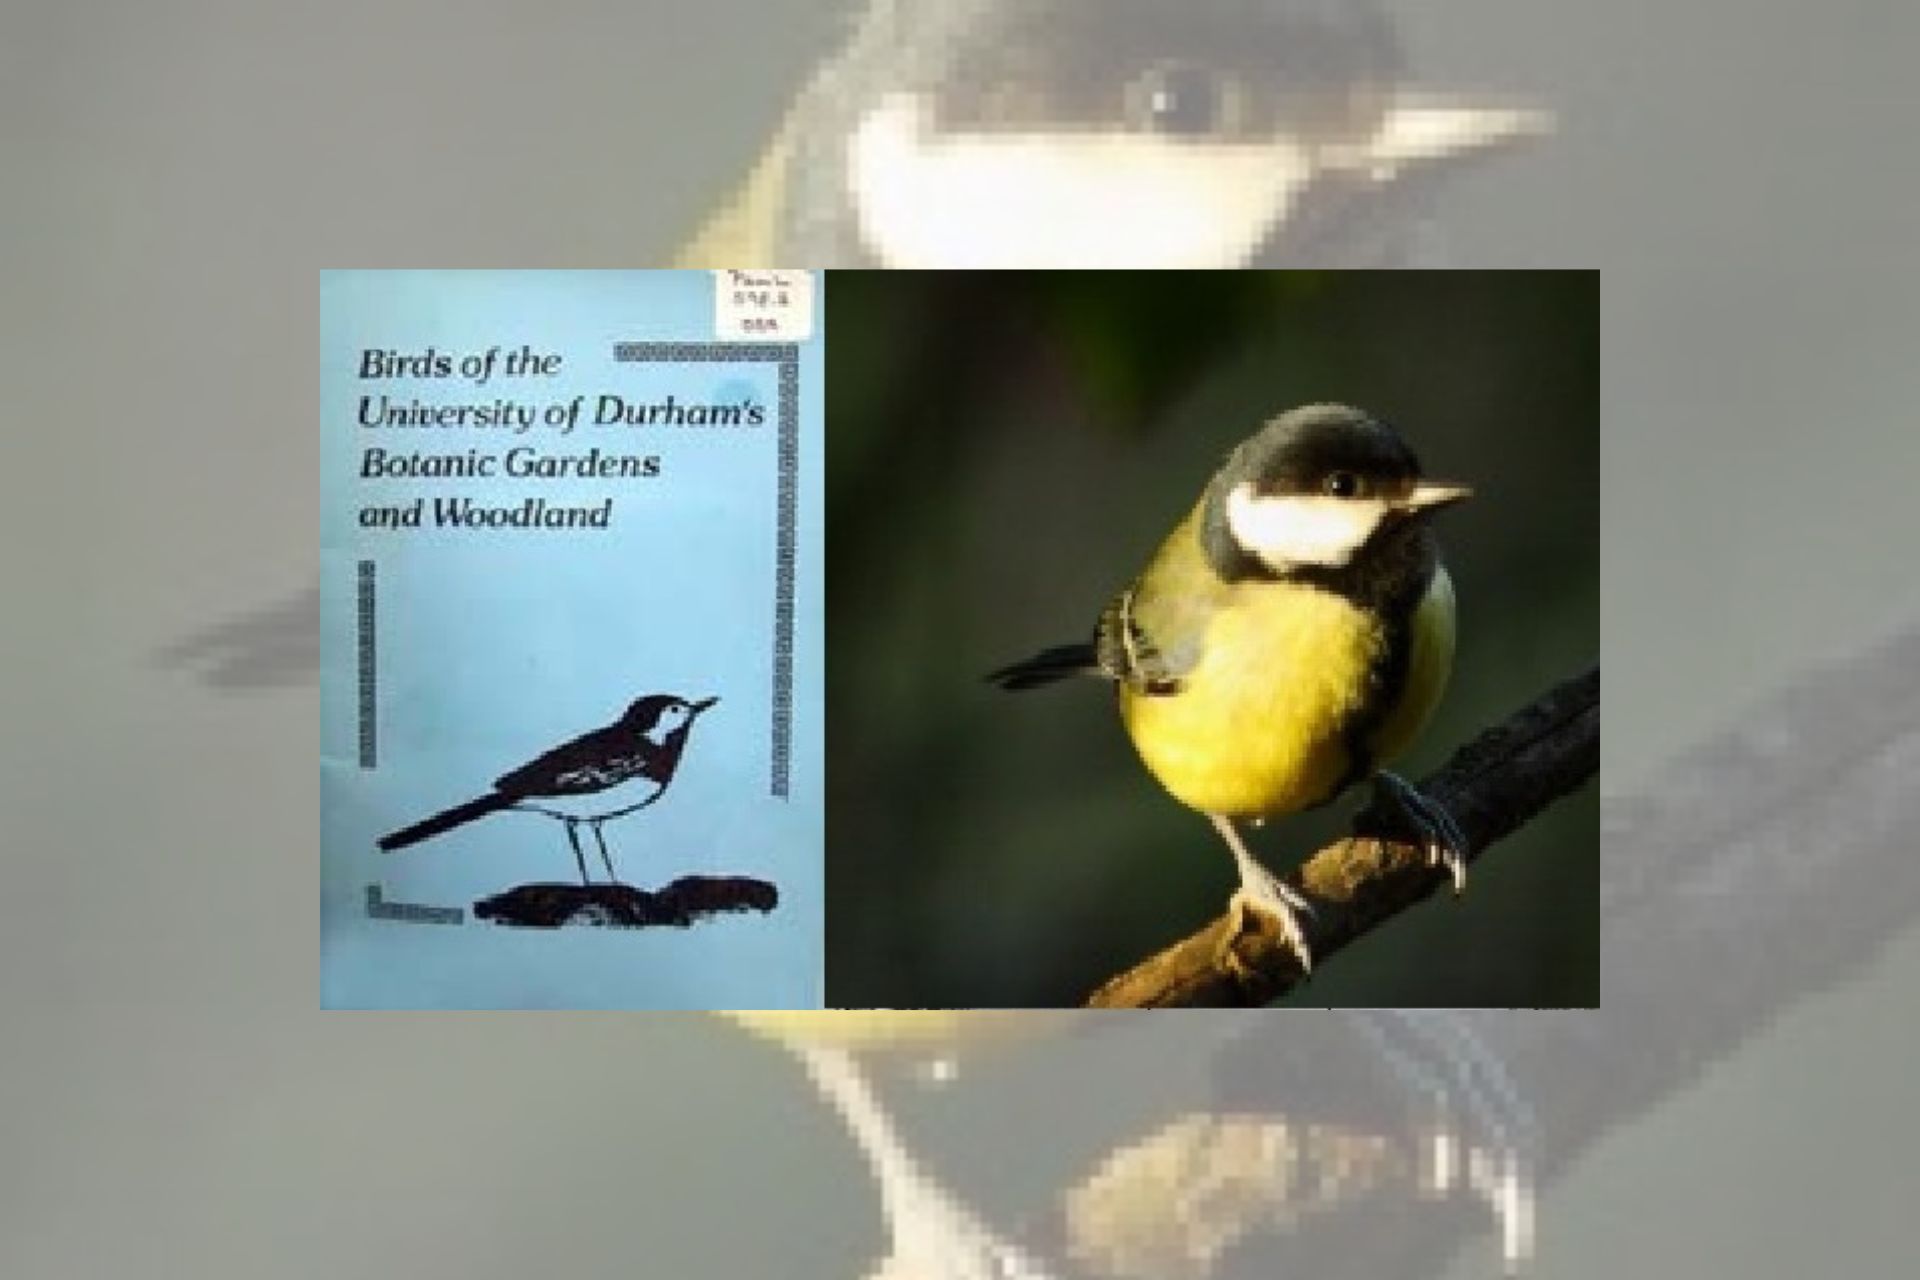 Birds of the University of Durham’s Botanic Gardens and Woodland, written in 1985 by Kathleen O'Brien.